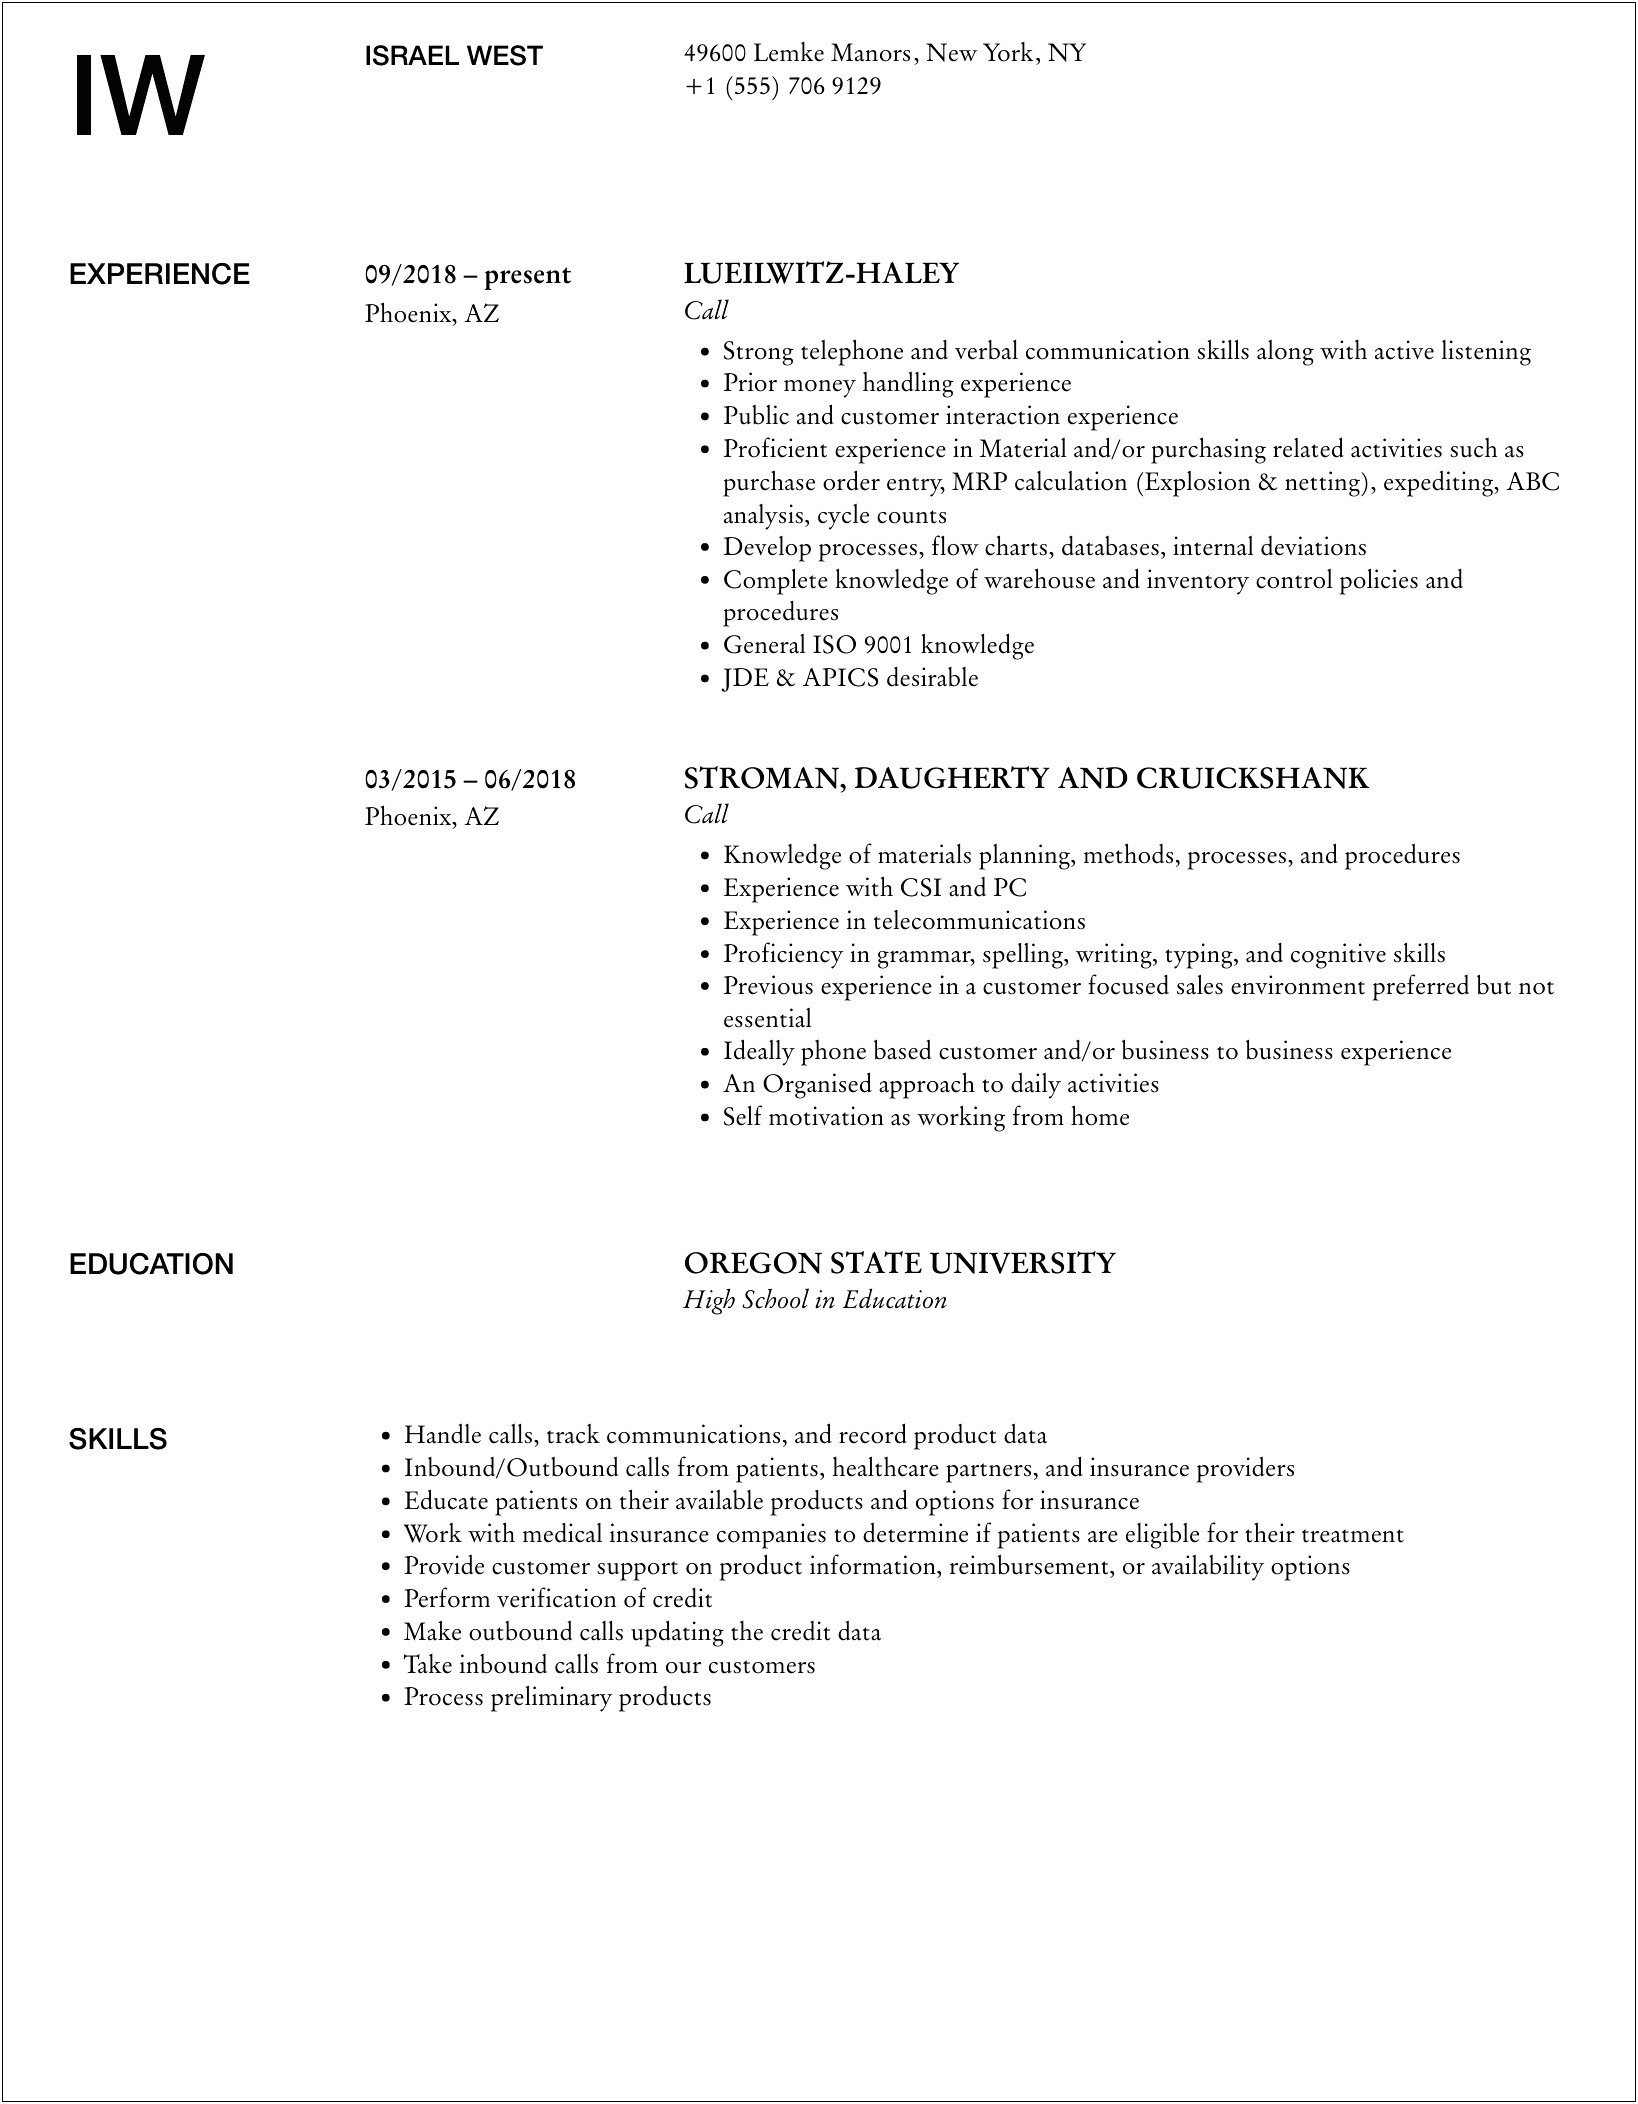 Resume Description Handle Phone Calls Mail And Emails